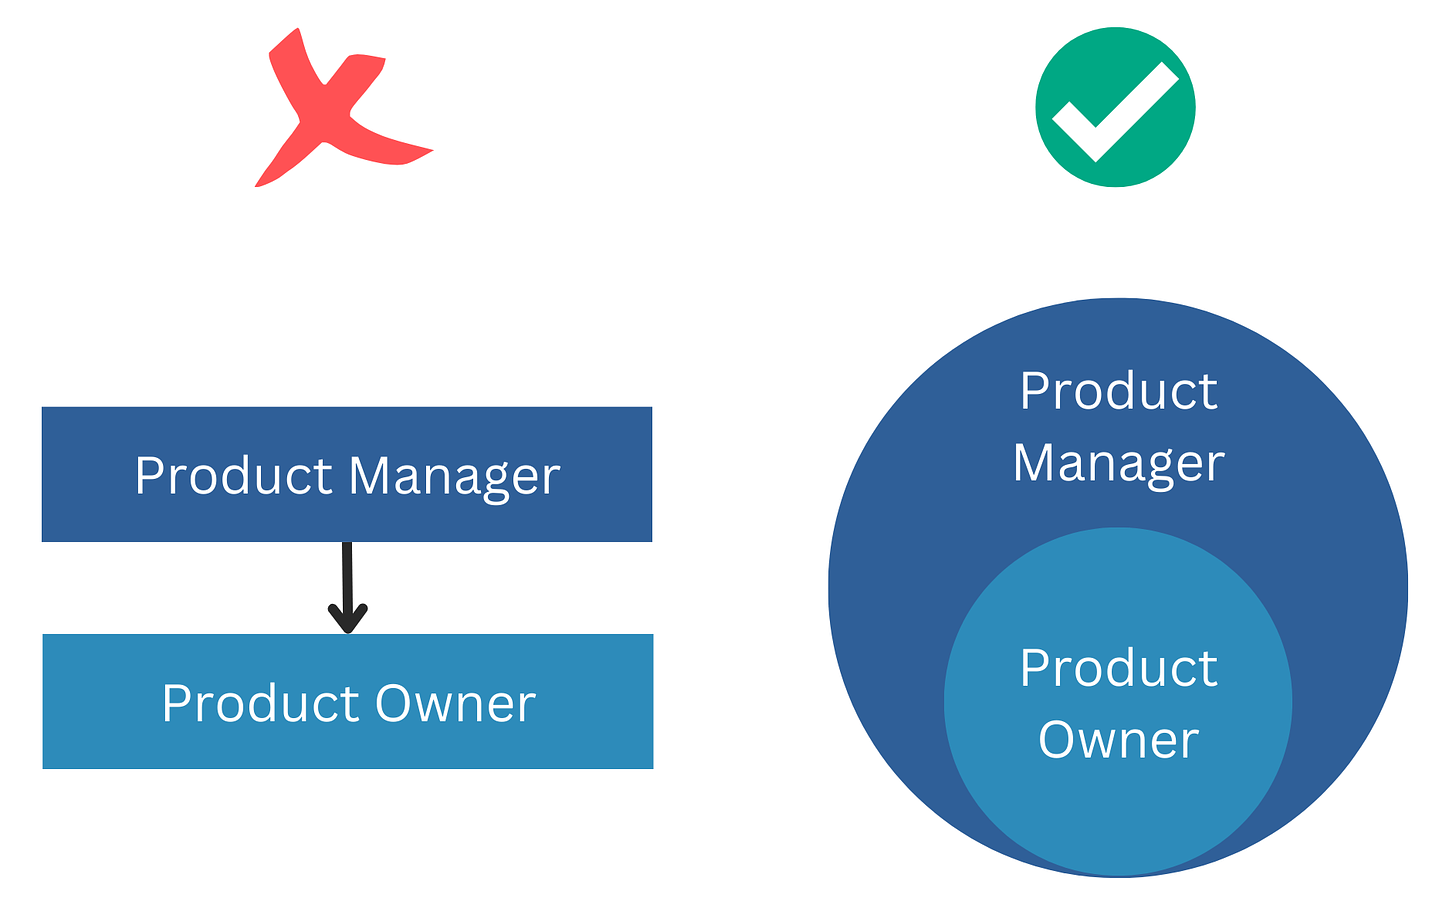 Product Owner vs Product Manager: What's the difference?